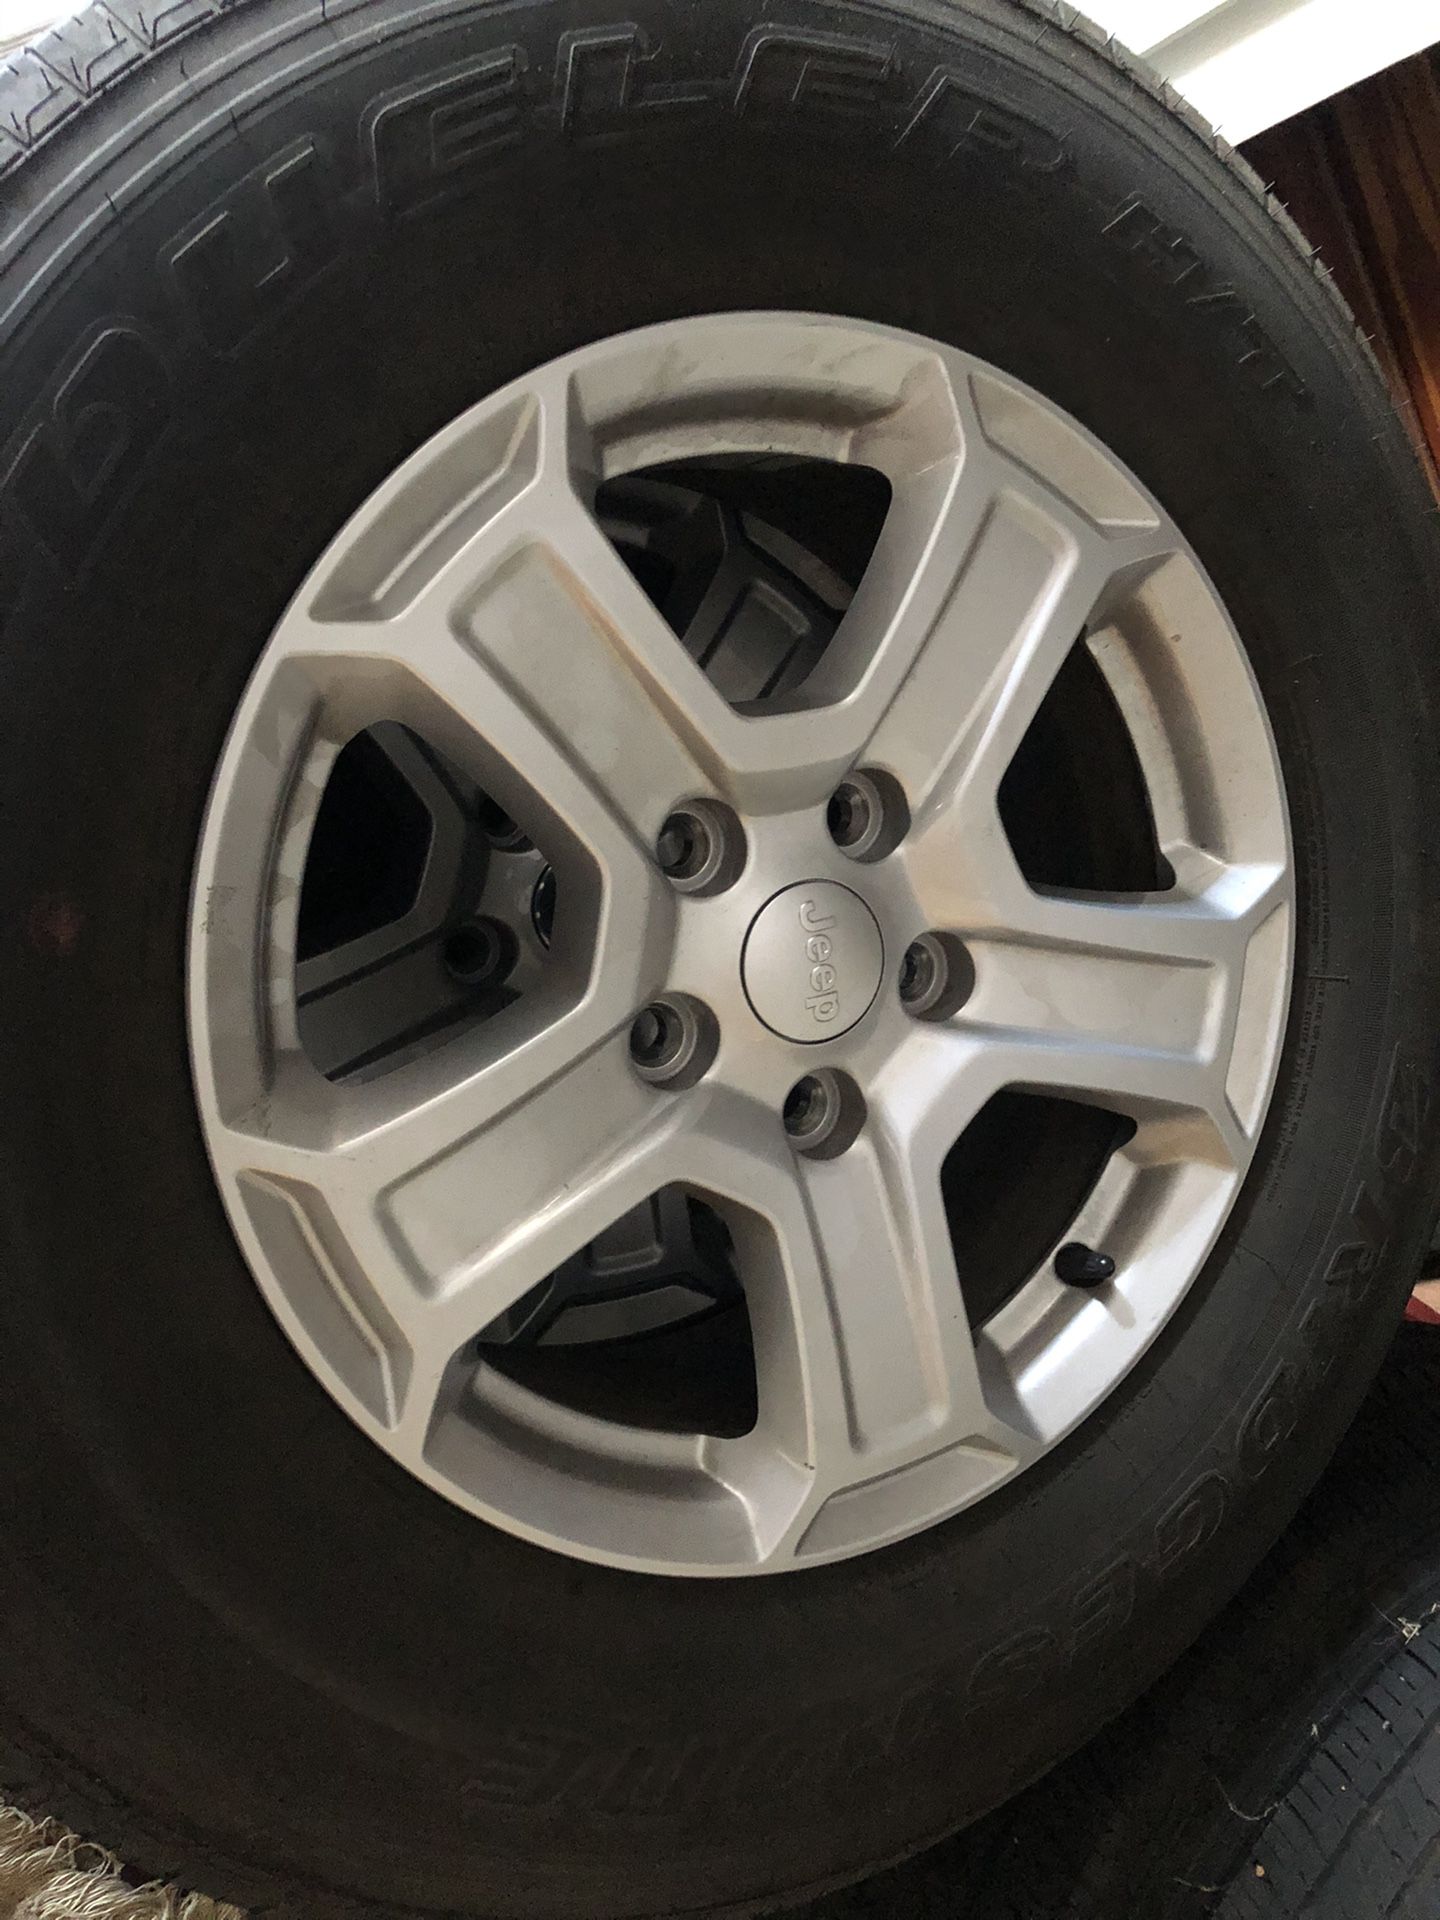 Full set of (5) 2018 Jeep Wrangler JL alloy wheels and tires (5).